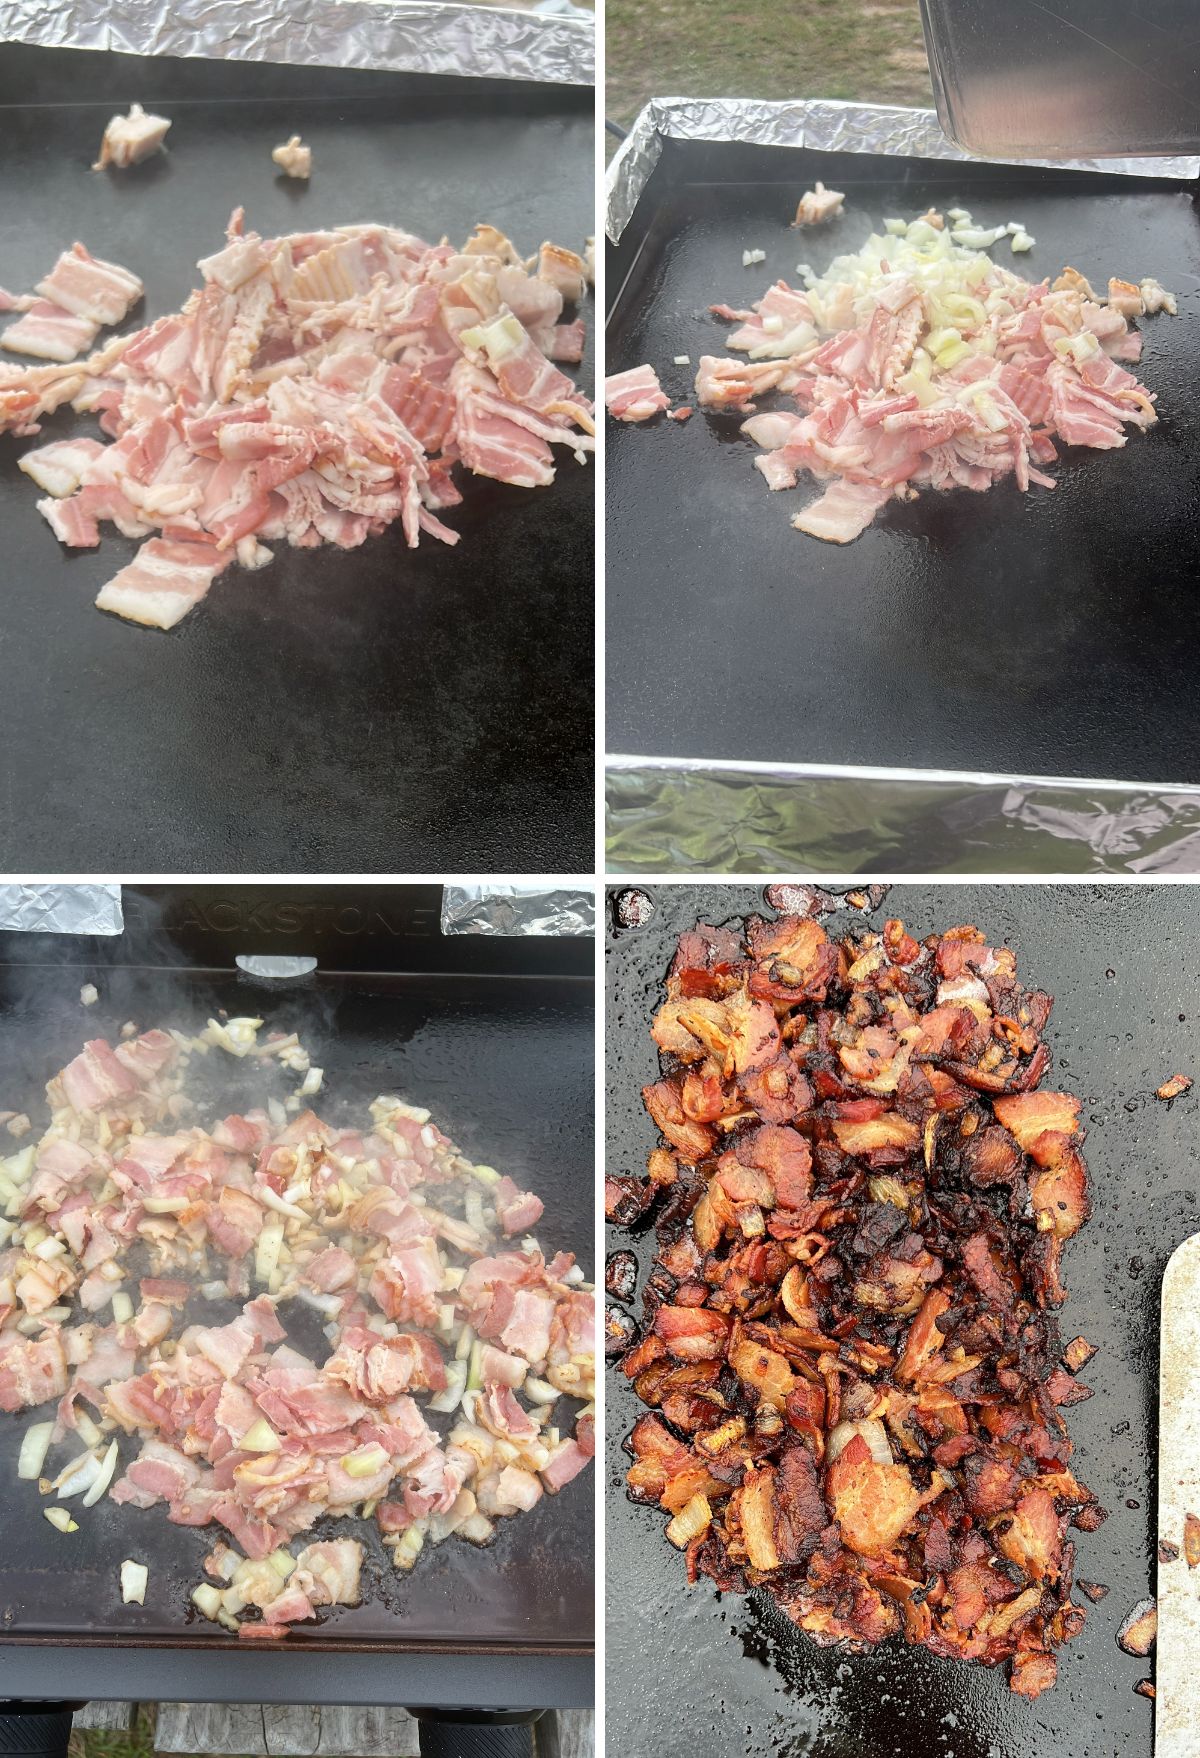 Four-step sequence of cooking bacon and onions on a griddle, showing raw, partially cooked, and fully cooked stages.